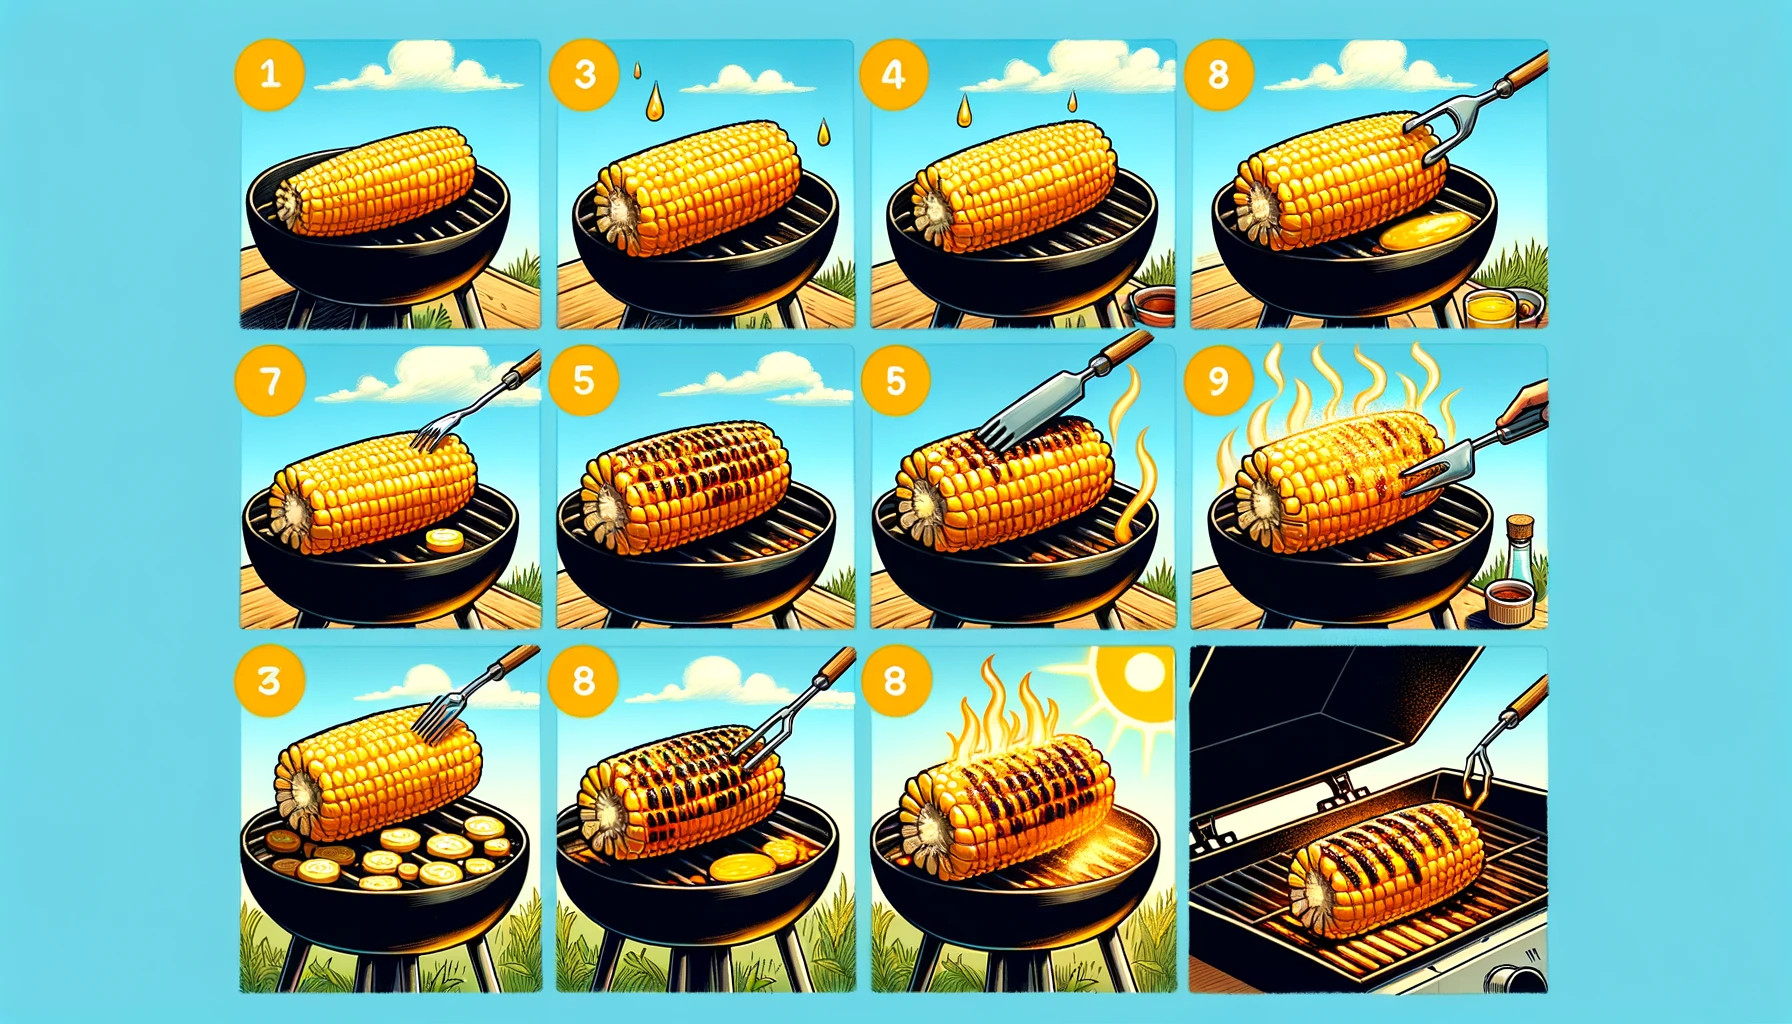 How to grill corn